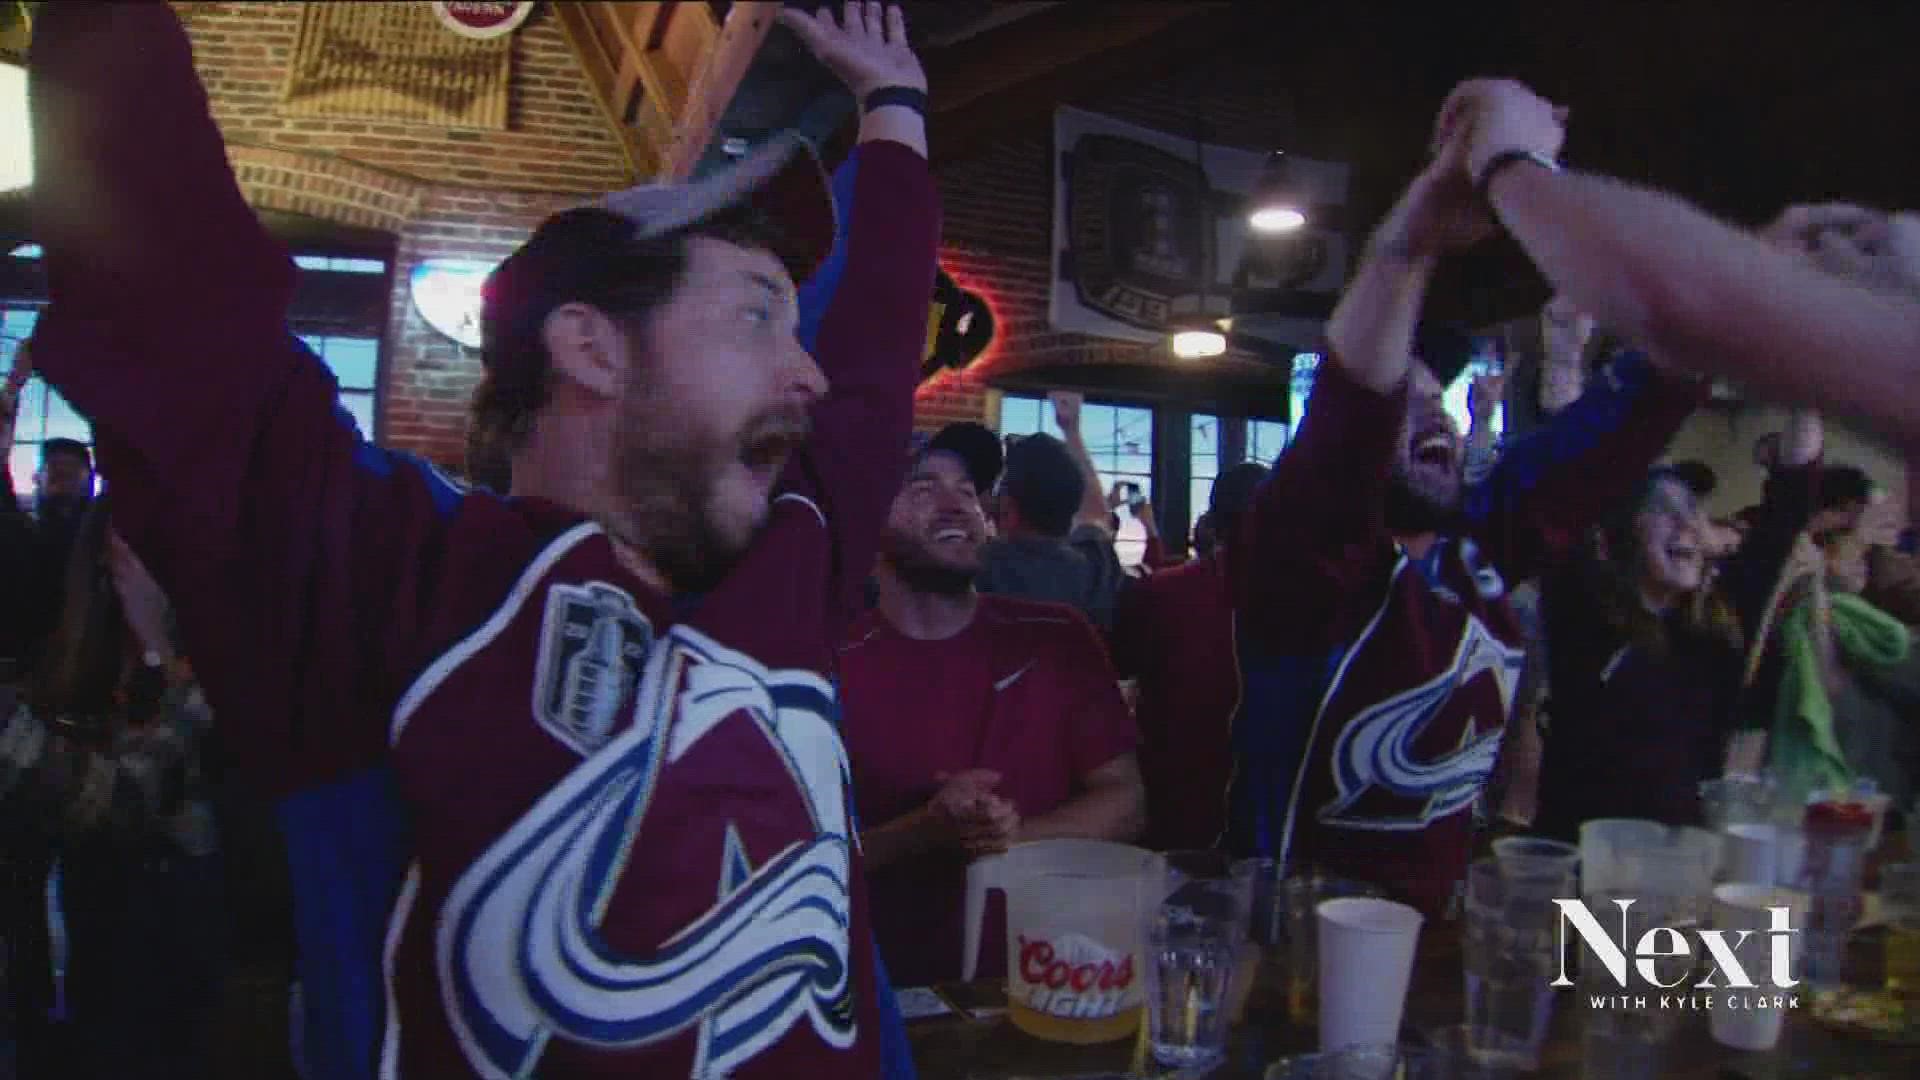 Colorado Avalanche fans are busy BIRGing these days, as Tampa Bay Lightning fans are CORFing down in Florida.